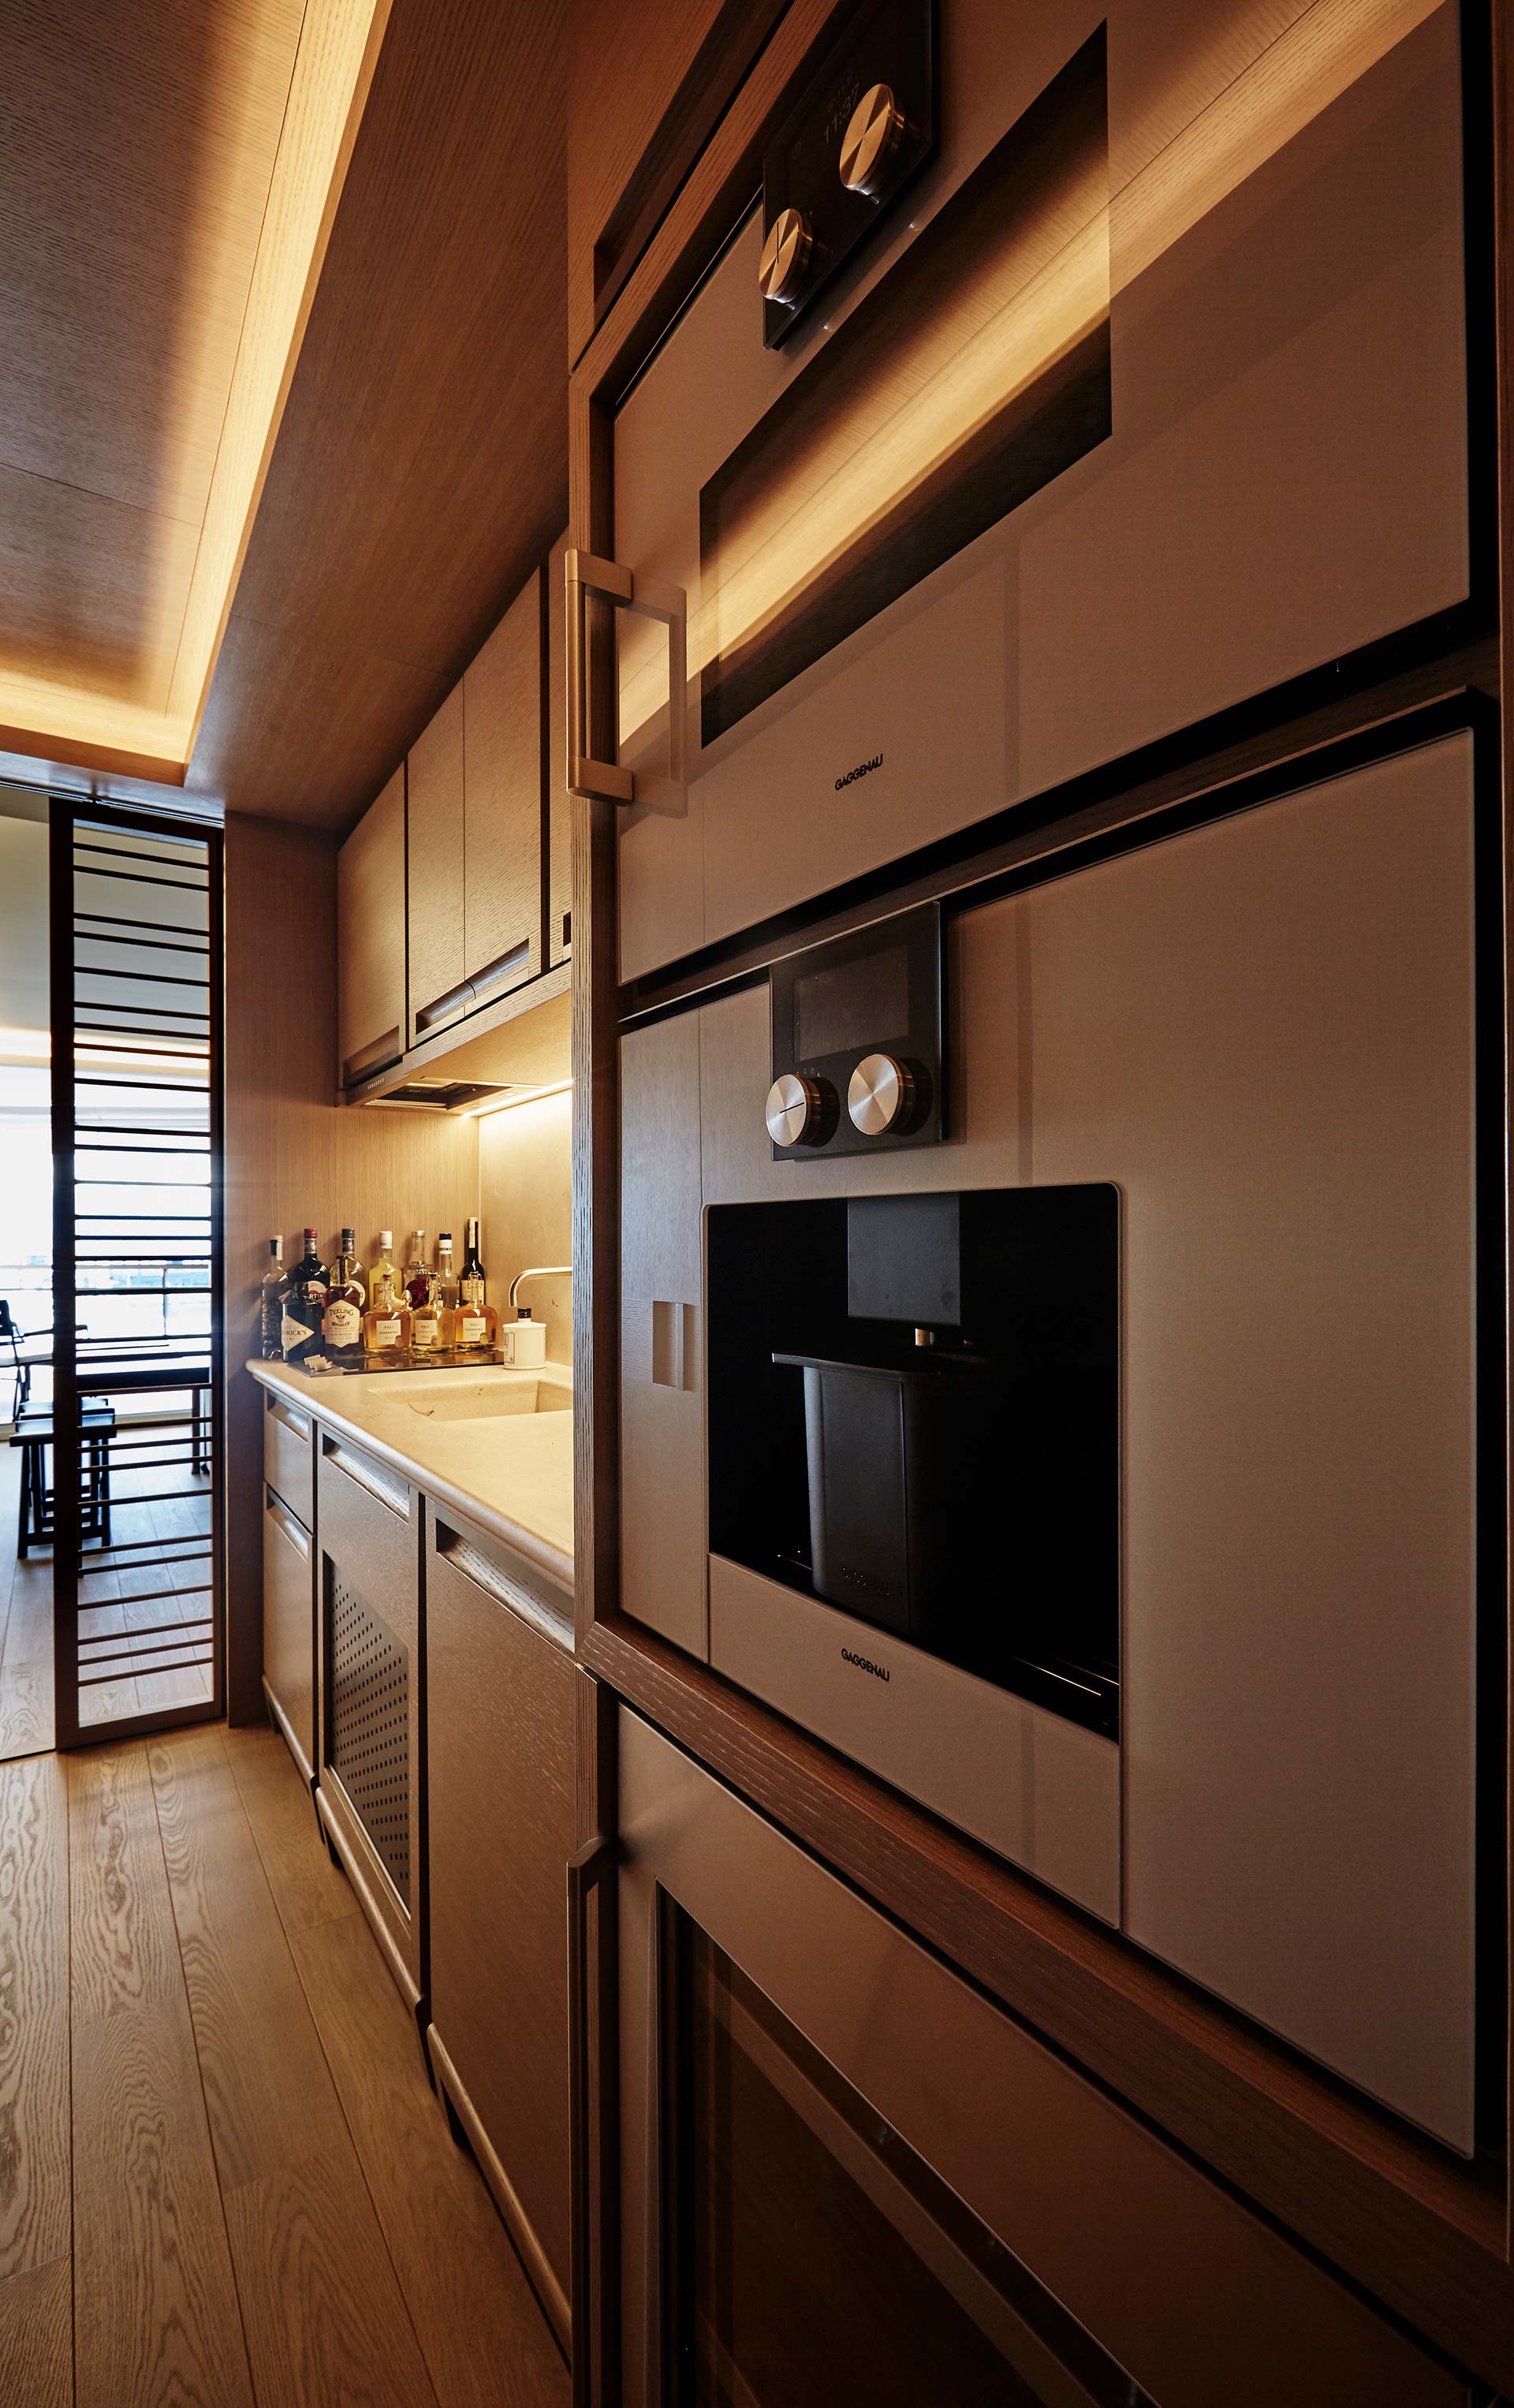 Kitchen of a private residence in Montecarlo furnished with Promemoria | Promemoria